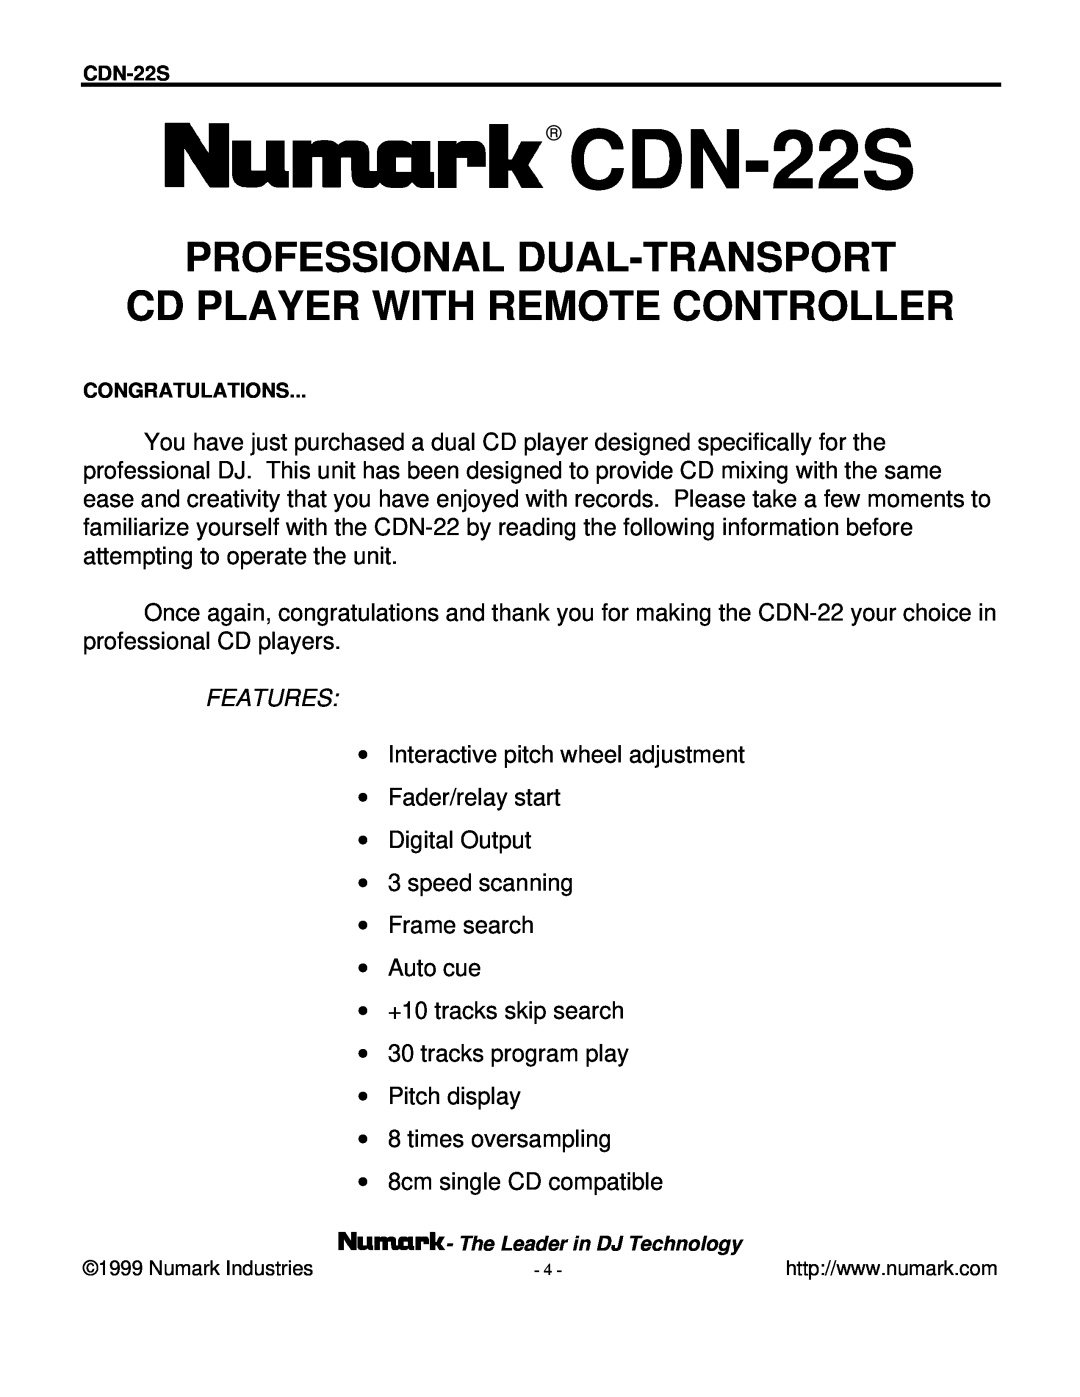 Numark Industries CDN-22S manual Professional Dual-Transport, Cd Player With Remote Controller 